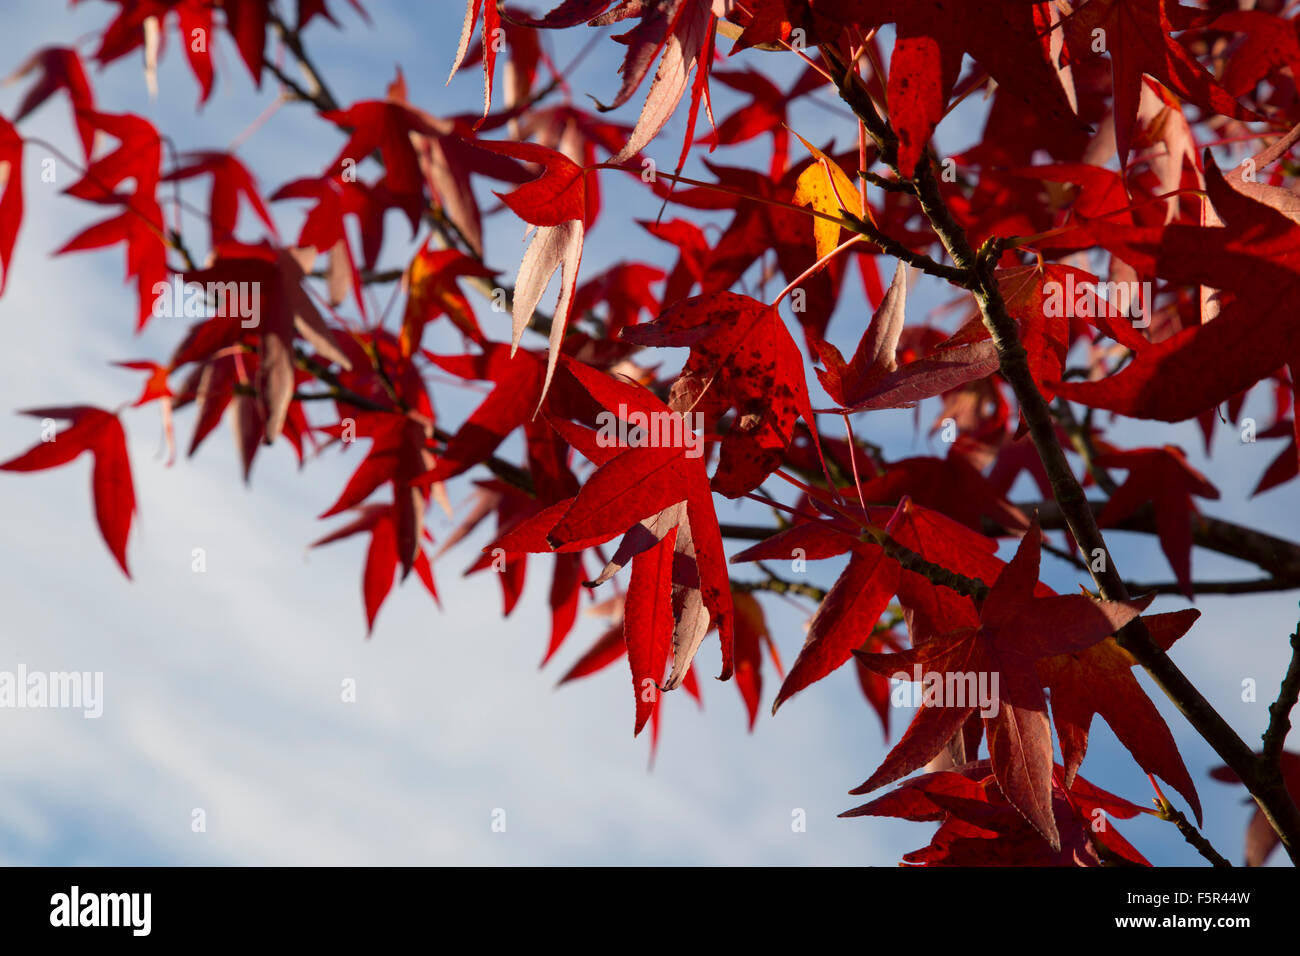 Stunning Red Autumn leaves against a blue and white sky background Stock Photo